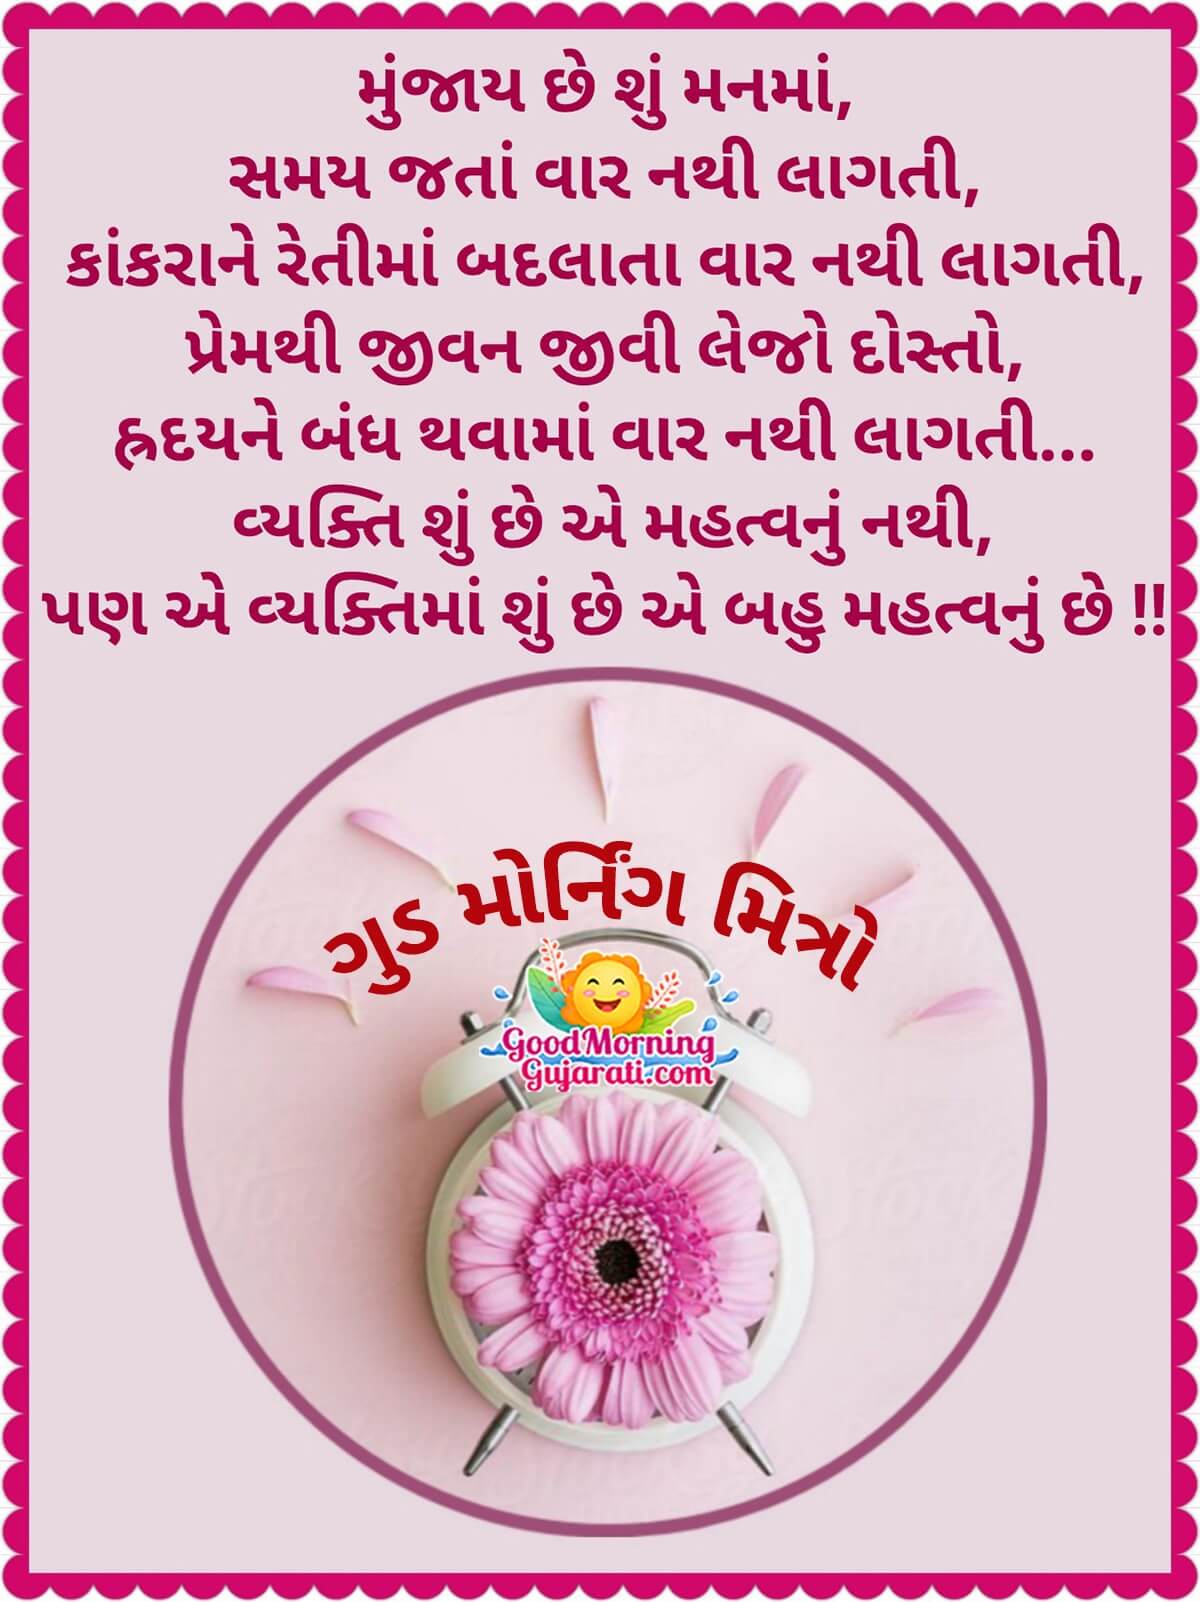 Good Morning Message To Friend In Gujarati